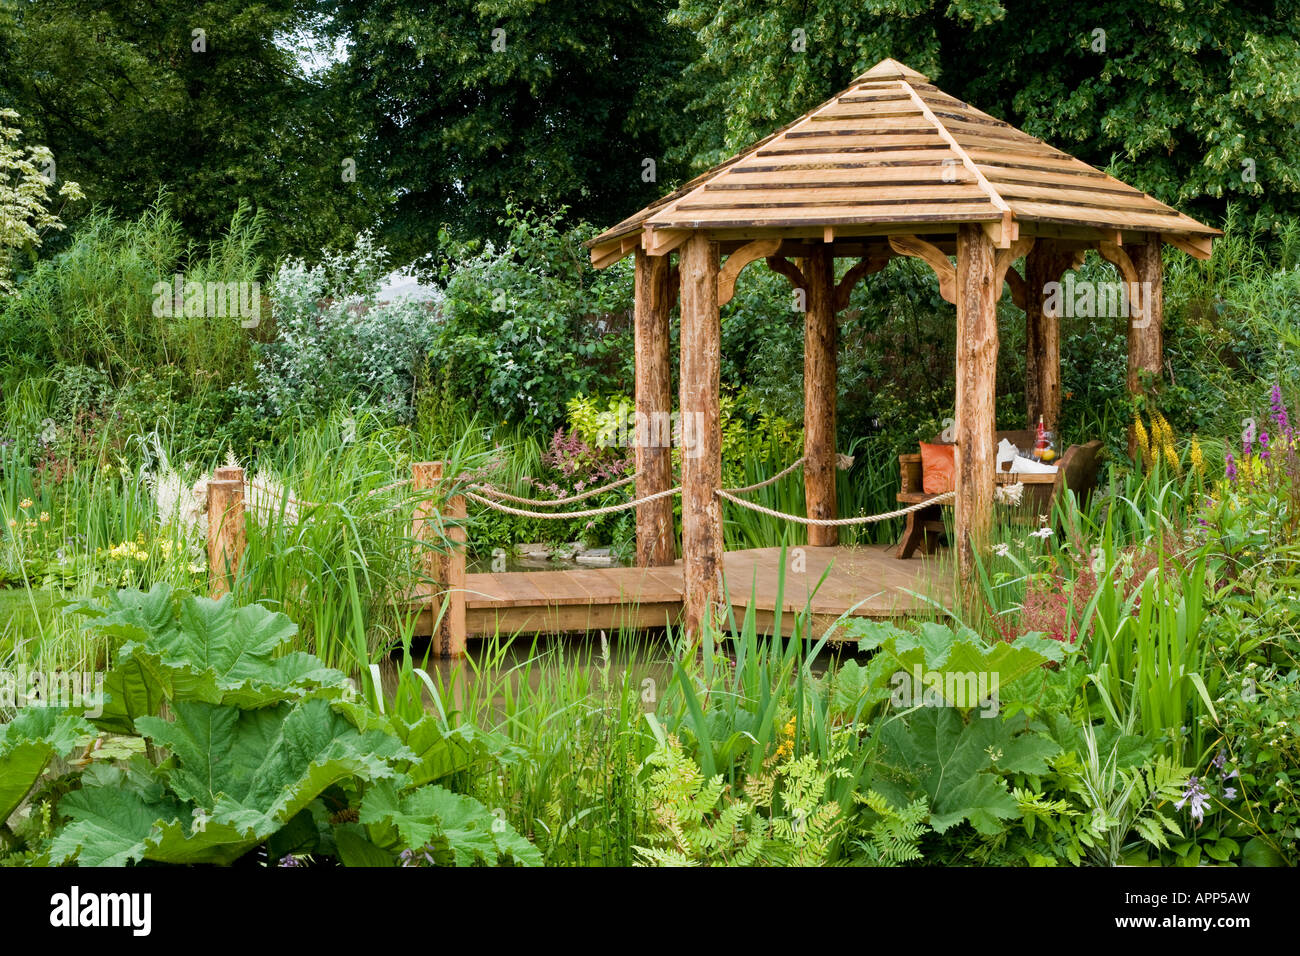 Rustic pergola on jetty over pool with chairs and table. Garden surrounds. Plants include Gunnera manicata and Equisetum hyemale Stock Photo